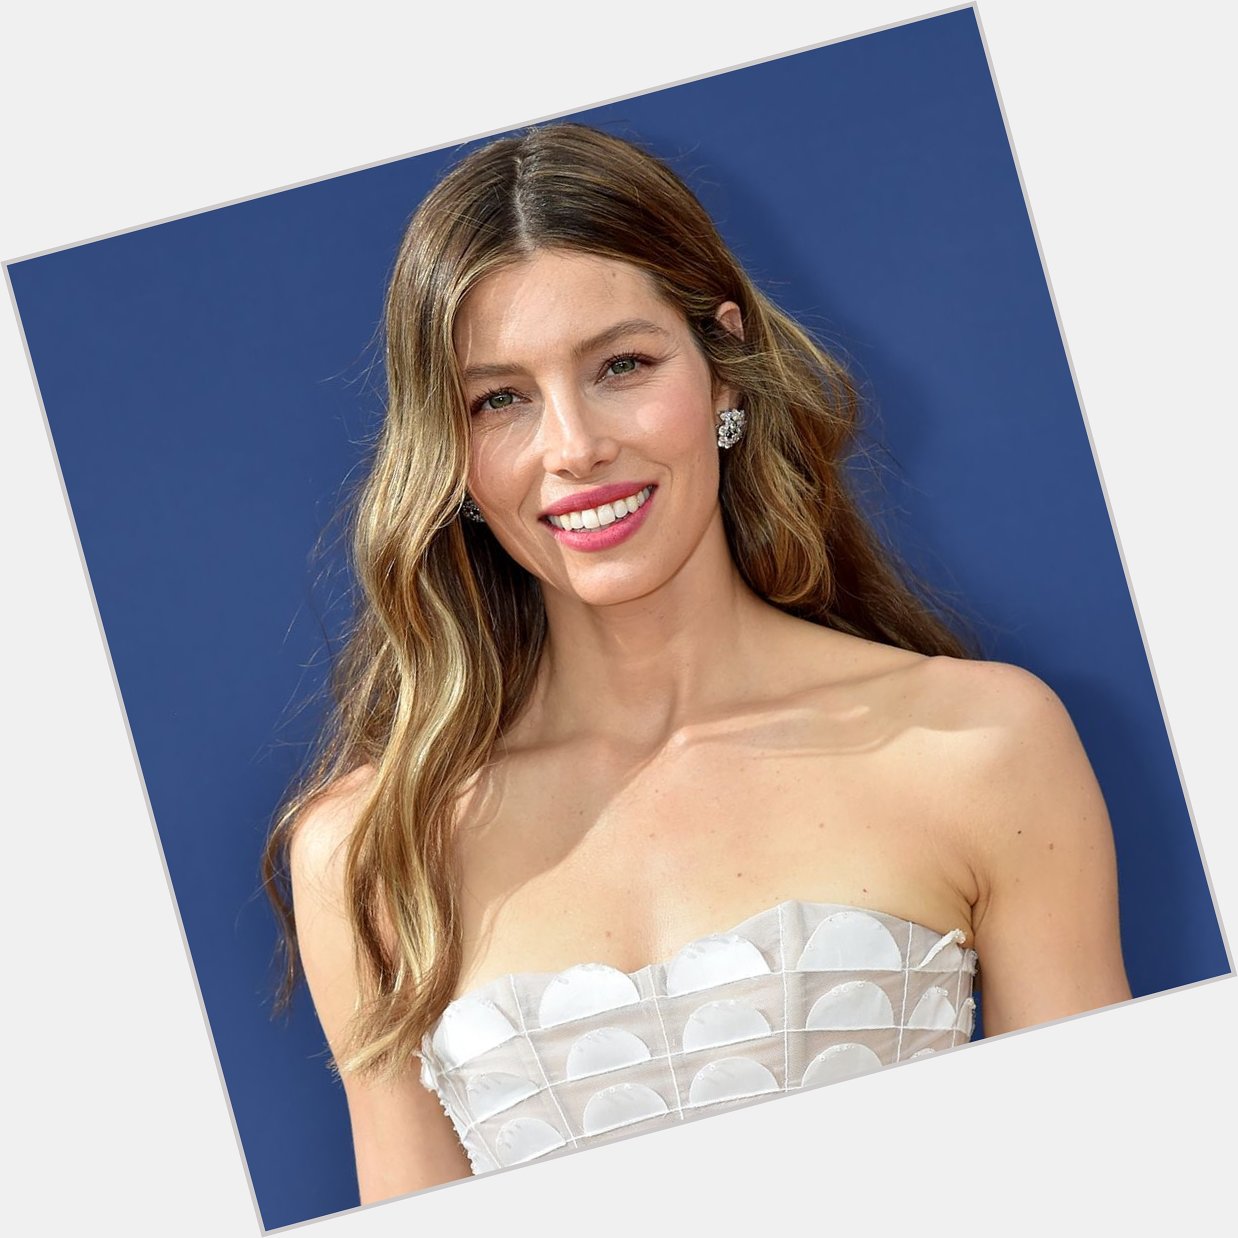 Local angle. 

Happy Birthday to Jessica Biel; born on this day in Ely, MInnesota. 